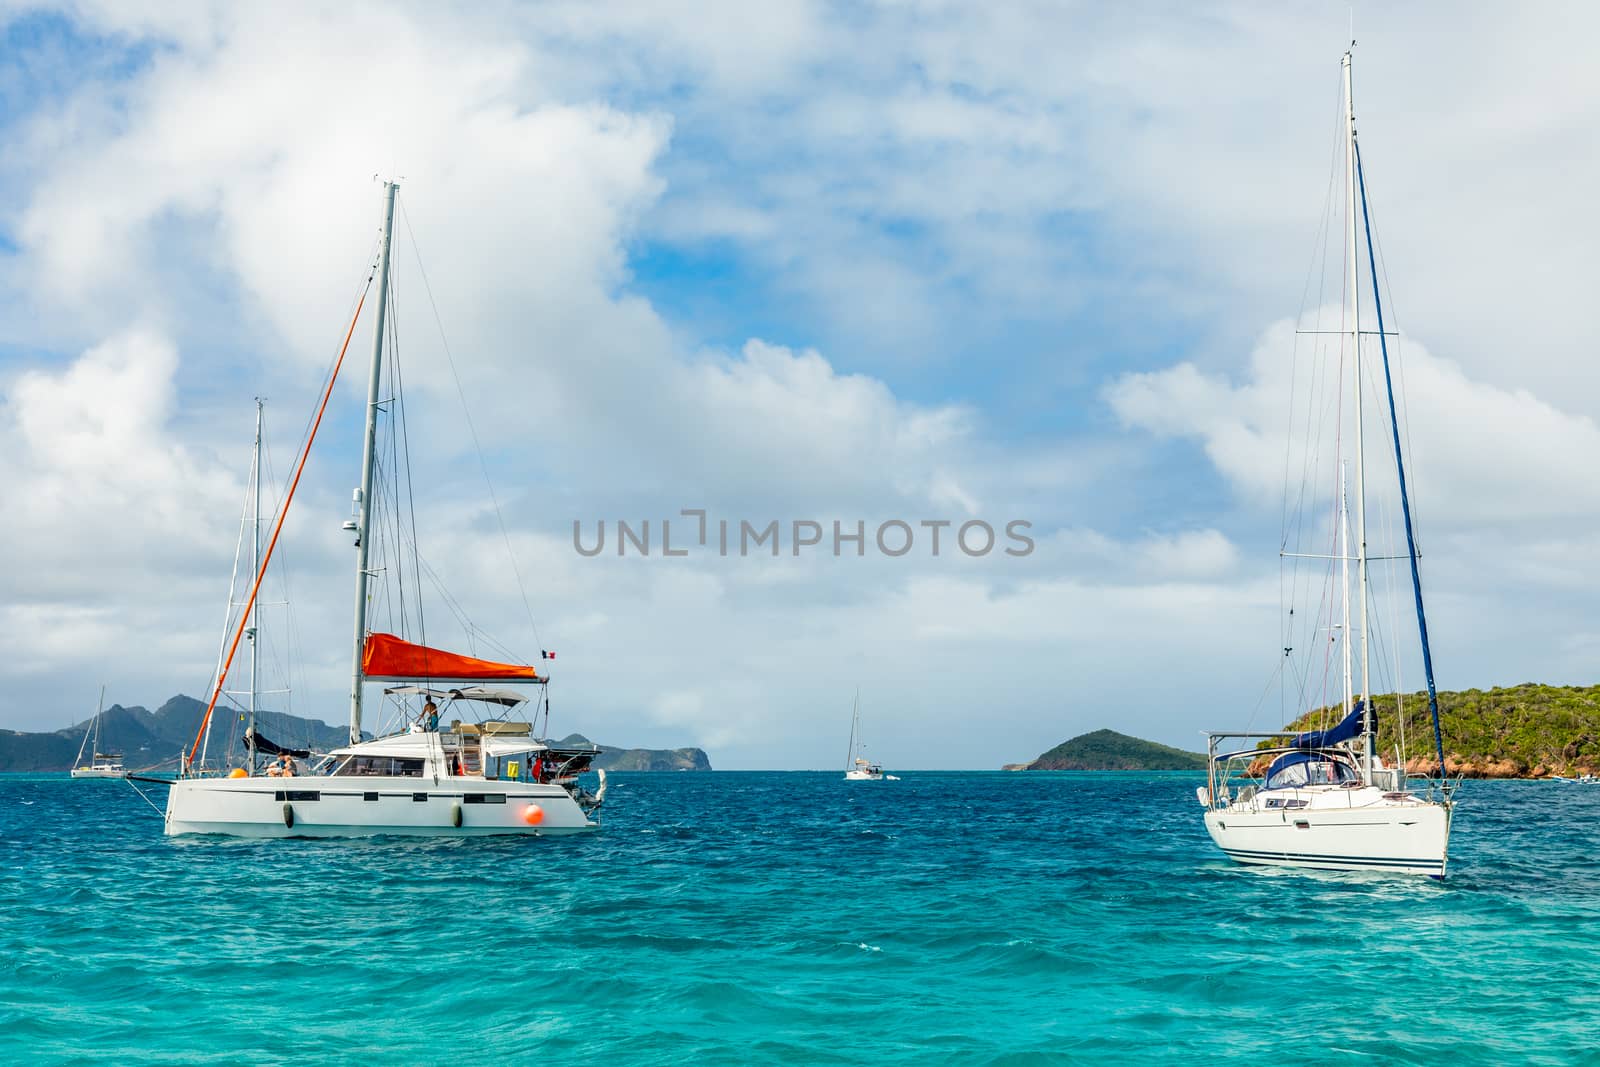 Turquoise sea and anchored yachts and catamarans, Tobago Cays, Saint Vincent and the Grenadines, Caribbean sea